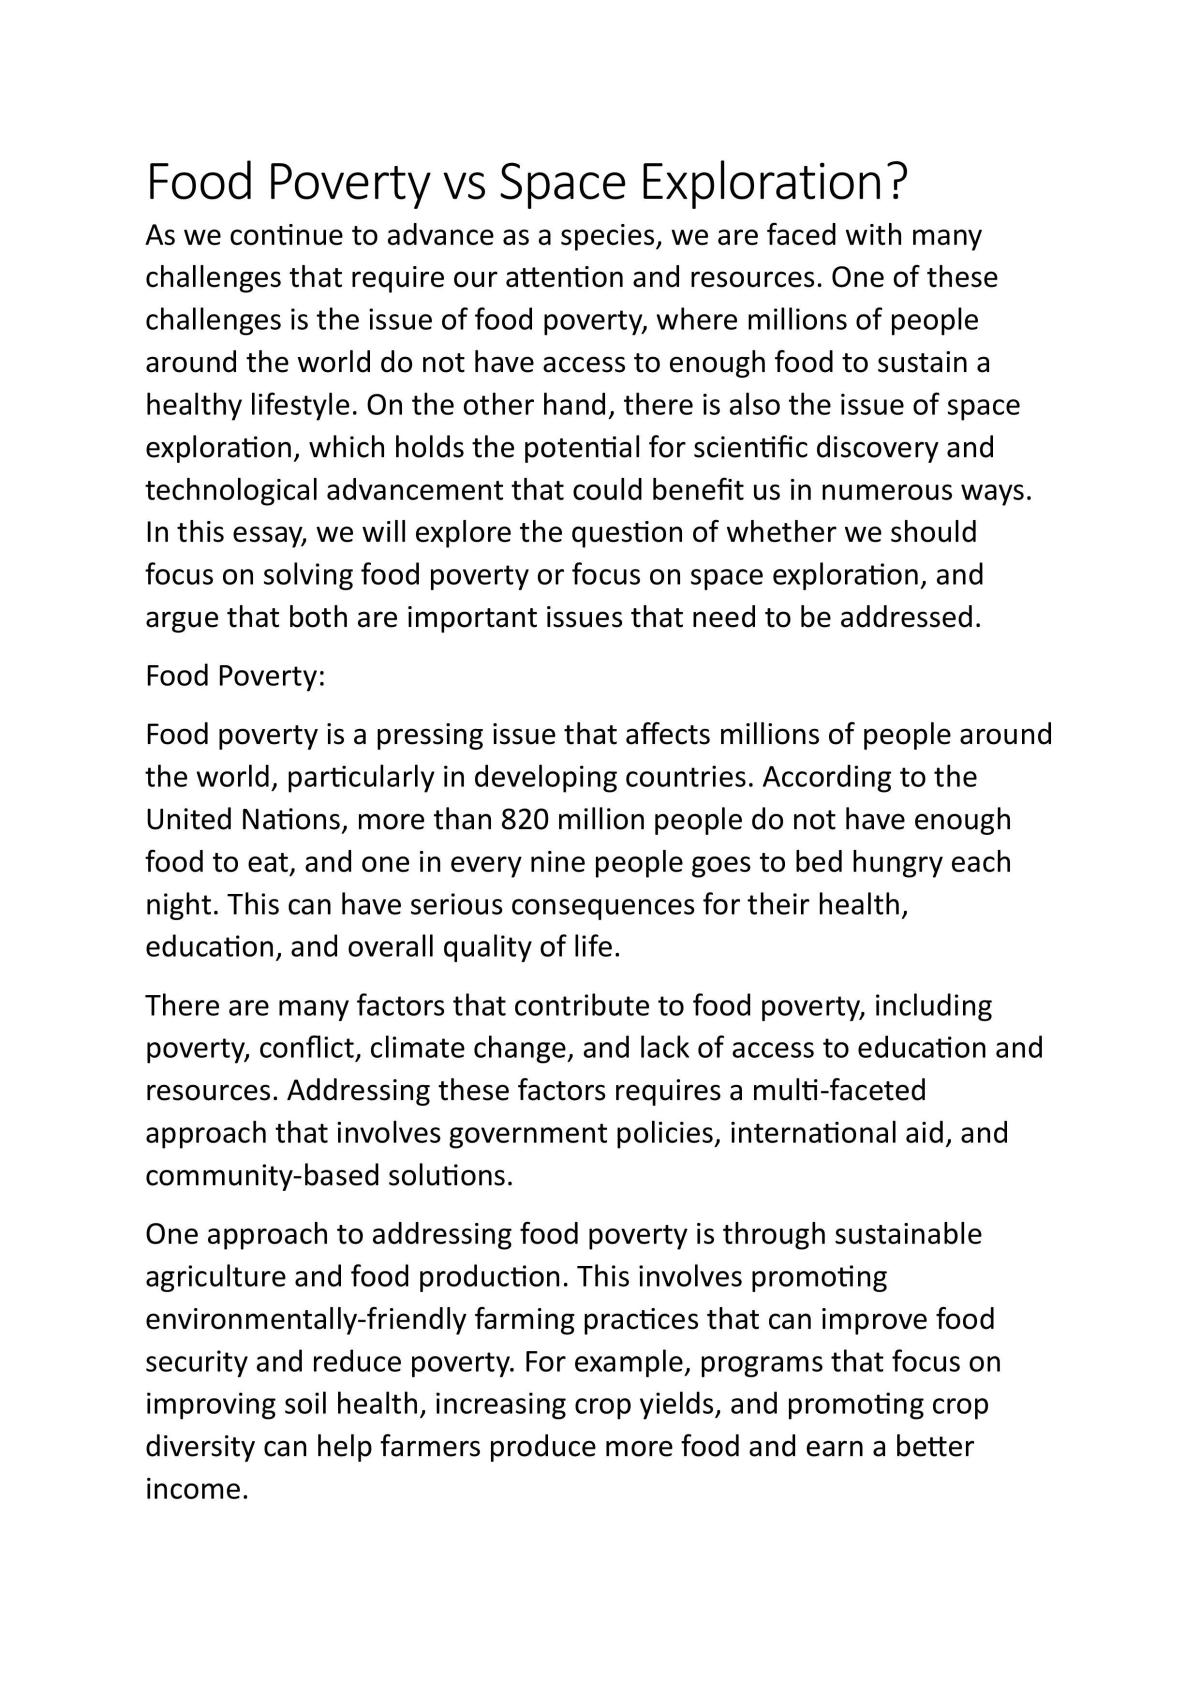 Should we solve food poverty or focus on space exploration? - Page 1